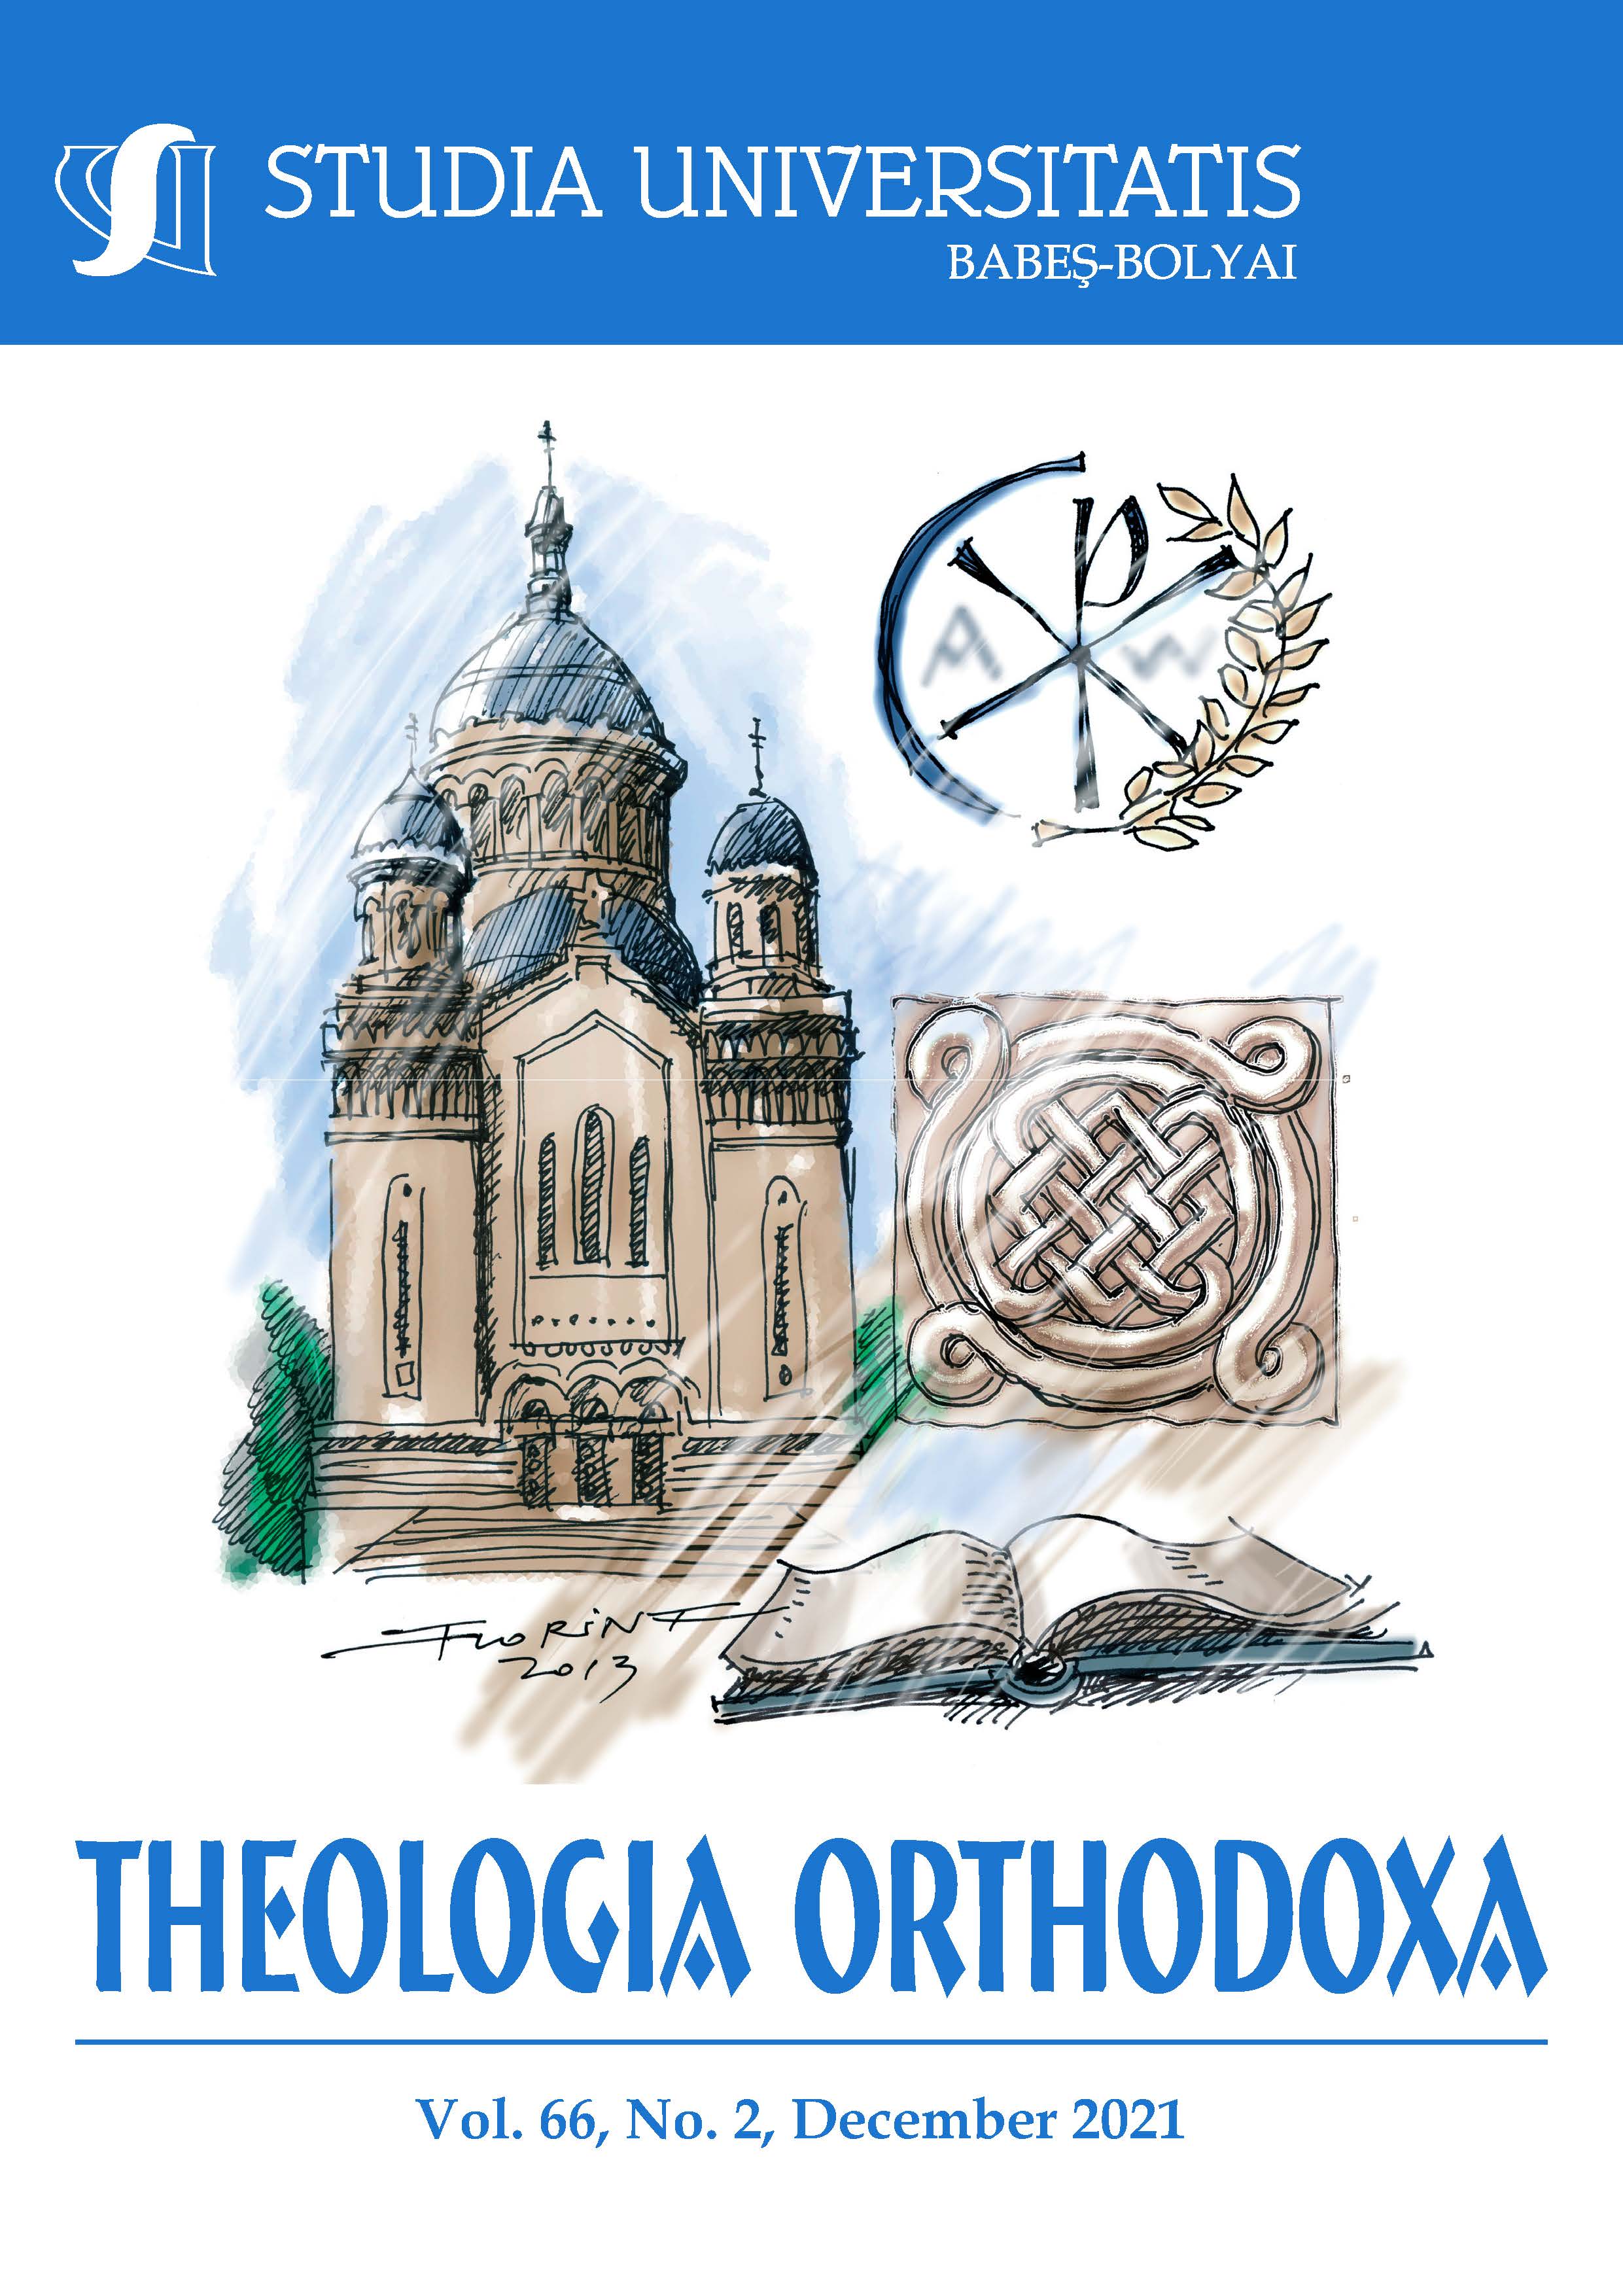 FOLLOWING JESUS CHRIST. UNDERSTANDING ORTHODOX MISSION TODAY, IN THEORY AND PRAXIS